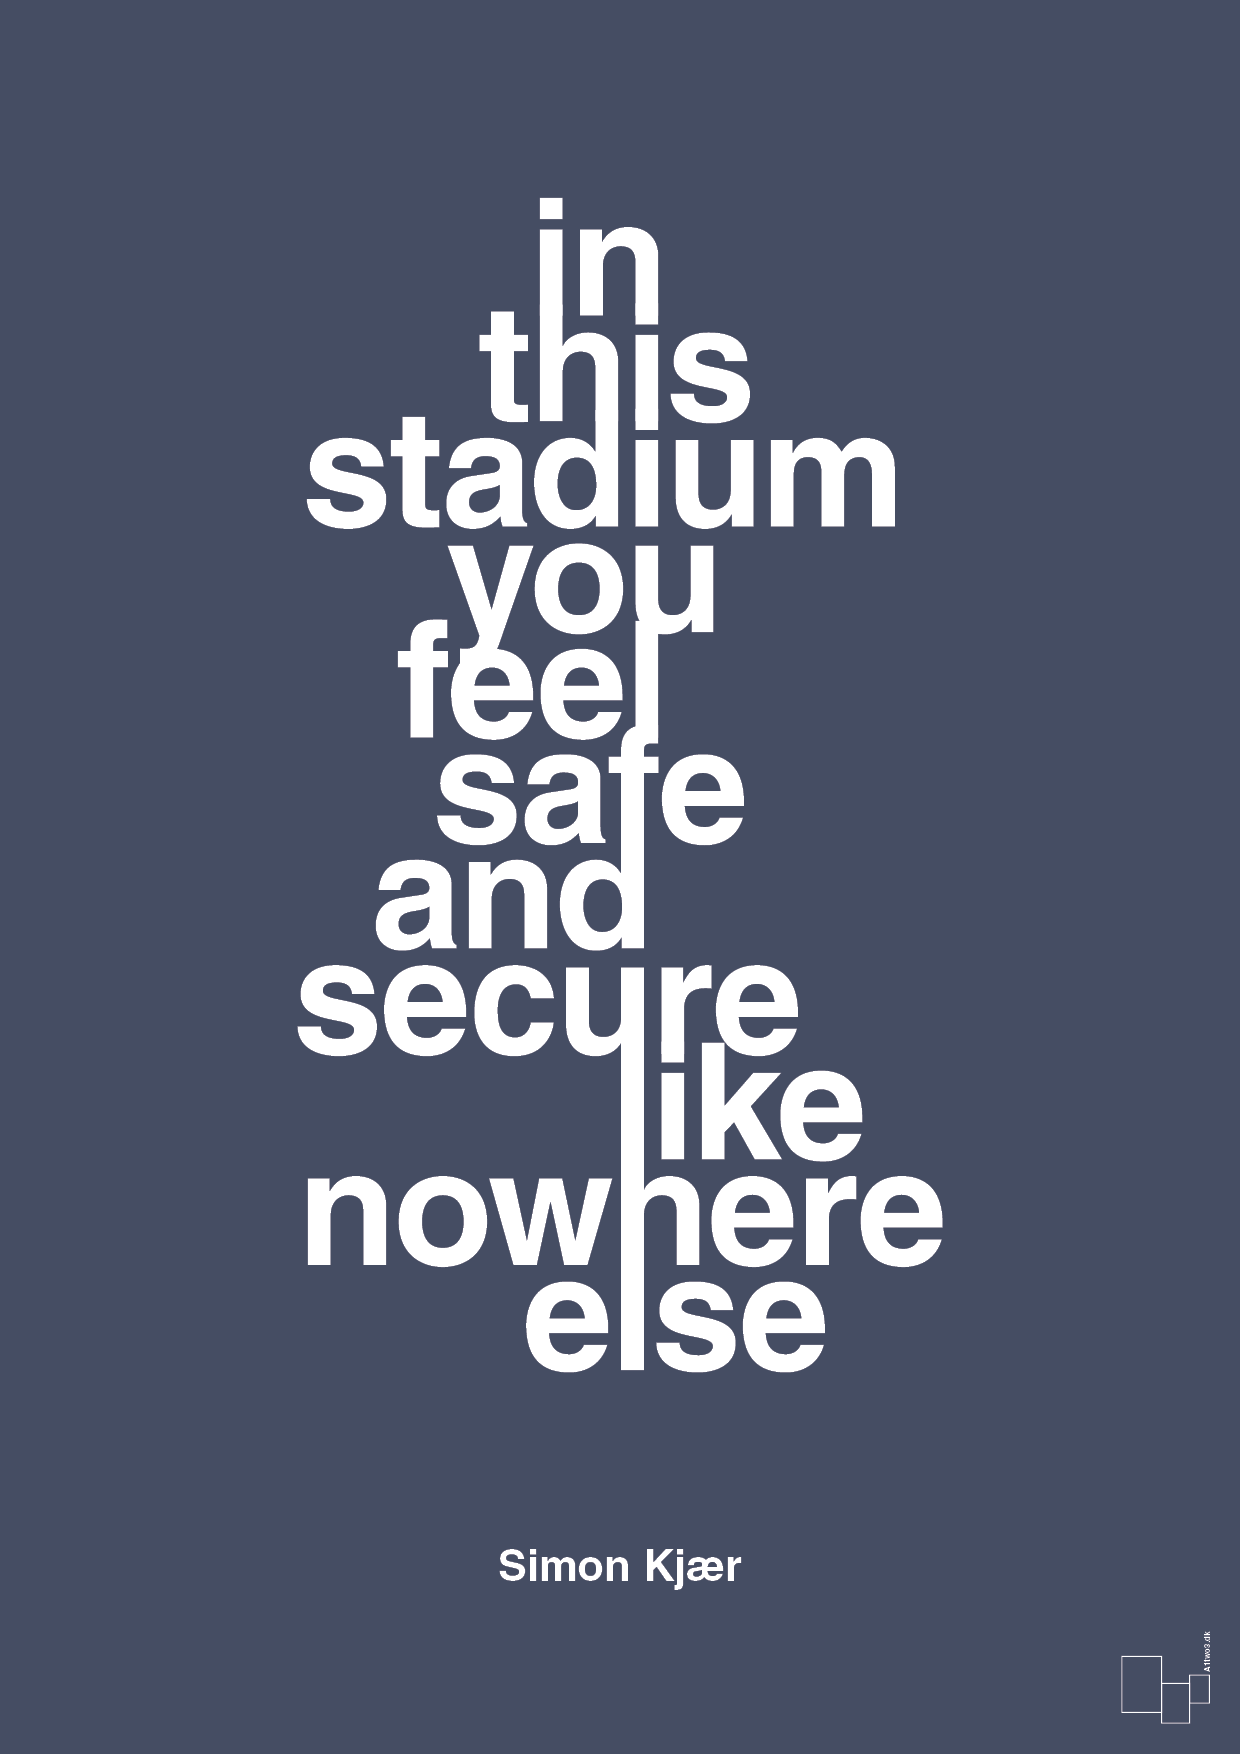 in this stadium you feel safe and secure like nowhere else - Plakat med Citater i Petrol